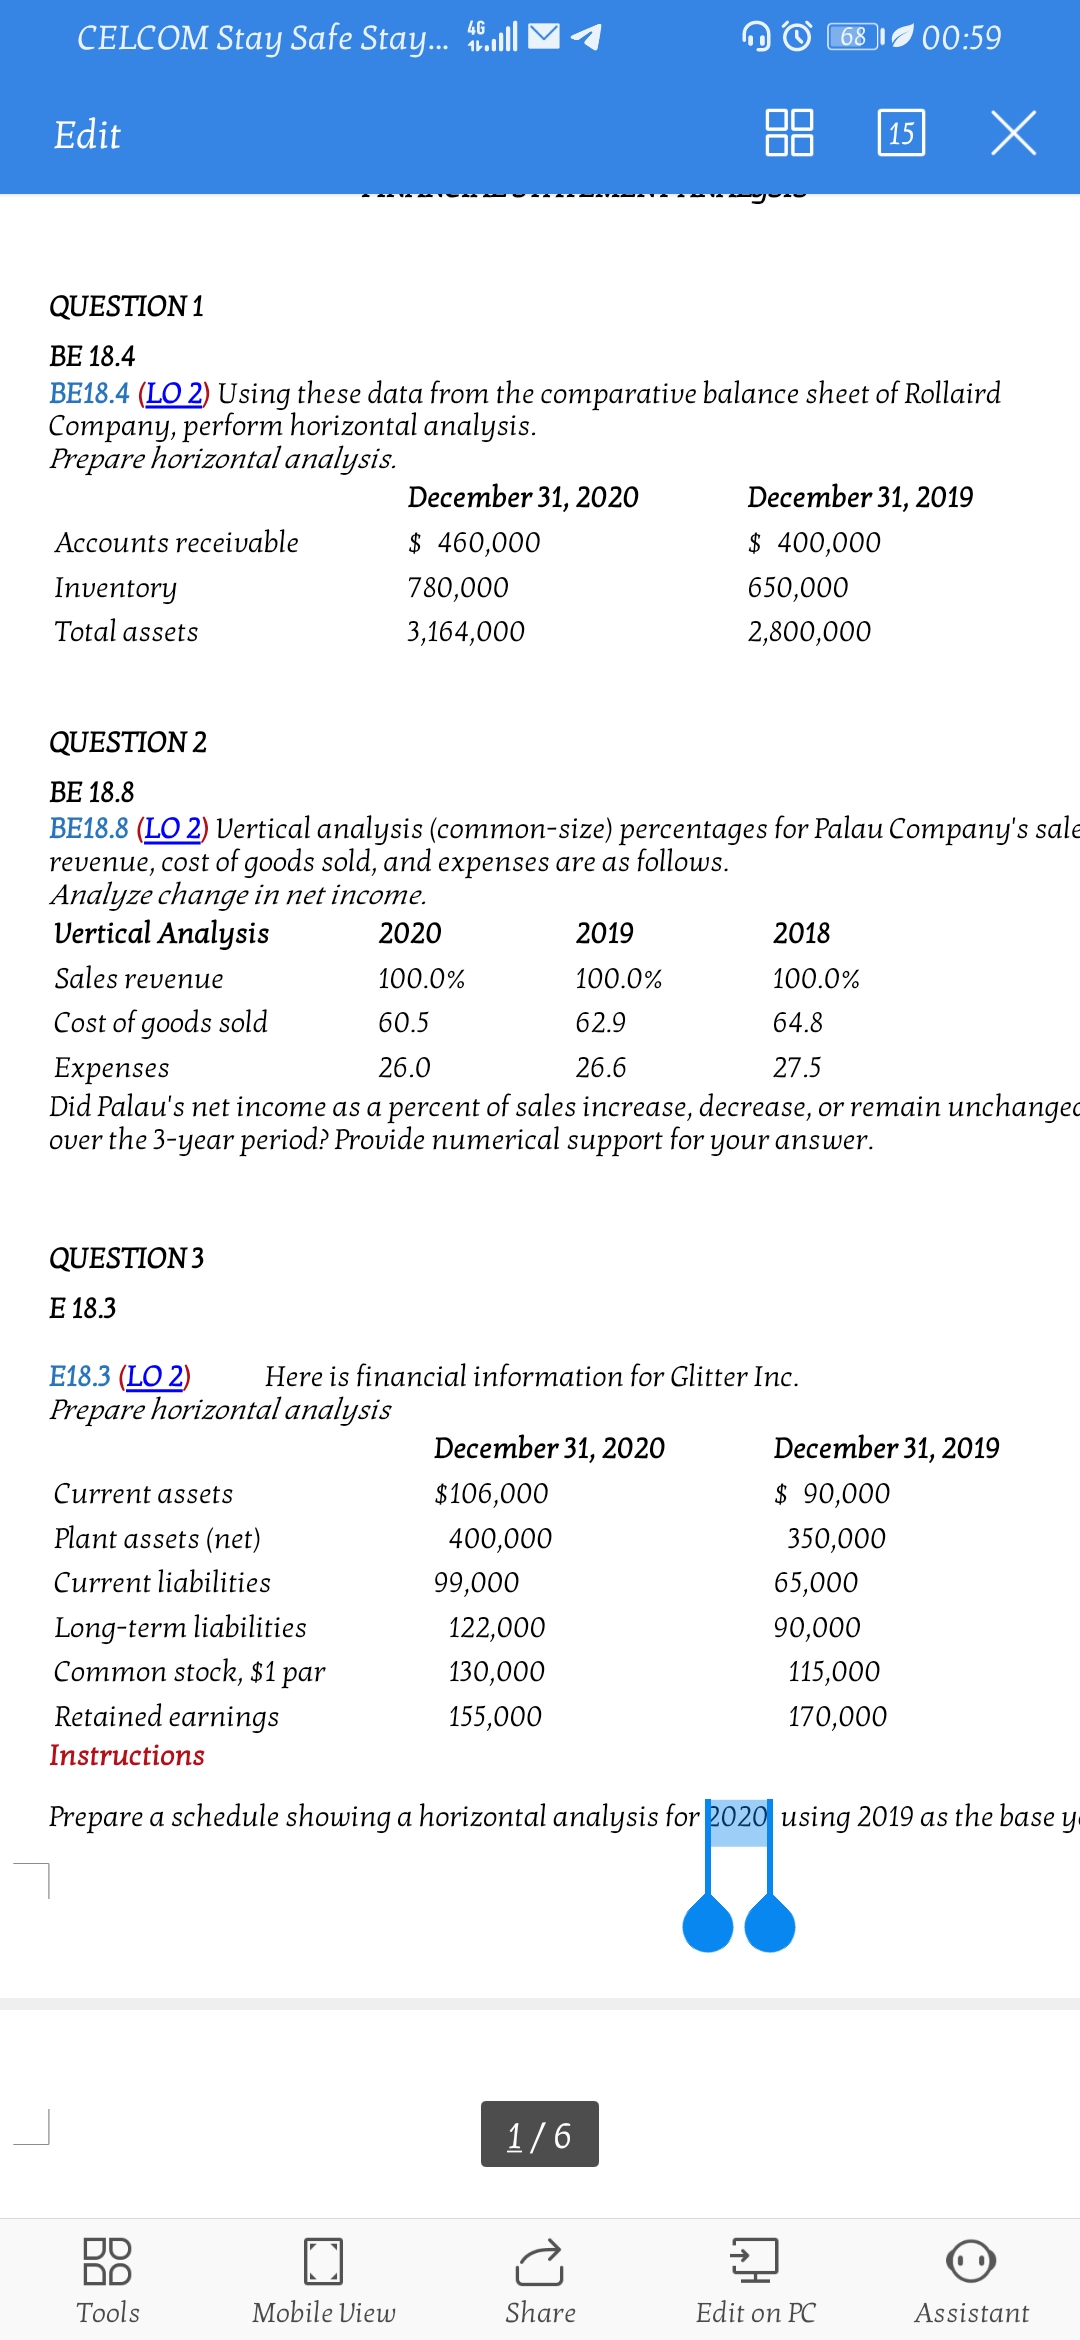 CELCOM Stay Safe Stay. all
4G
68
'00:59
Edit
88
15
QUESTION 1
BE 18.4
BE18.4 (LO 2) Using these data from the comparative balance sheet of Rollaird
Company, perform horizontal analysis.
Prepare horizontal analysis.
December 31, 2020
December 31, 2019
Accounts receivable
$ 460,000
$ 400,000
Inventory
780,000
650,000
Total assets
3,164,000
2,800,000
QUESTION 2
ВЕ 18.8
BE18.8 (LO 2) Vertical analysis (common-size) percentages for Palau Company's sale
revenue, cost of goods sold, and expenses are as follows.
Analyze change in net income.
Vertical Analysis
2020
2019
2018
Sales revenue
100.0%
100.0%
100.0%
Cost of goods sold
60.5
62.9
64.8
Expenses
Did Palau's net income as a percent of sales increase, decrease, or remain unchanged
over the 3-year period? Provide numerical support for your answer.
26.0
26.6
27.5
QUESTION 3
Е 18.3
E18.3 (LO 2)
Prepare horizontal analysis
Here is financial information for Glitter Inc.
December 31, 2020
December 31, 2019
Current assets
$106,000
$ 90,000
Plant assets (net)
400,000
350,000
Current liabilities
99,000
65,000
Long-term liabilities
Common stock, $1
122,000
90,000
par
130,000
115,000
Retained earnings
155,000
170,000
Instructions
Prepare a schedule showing a horizontal analysis for 2020 using 2019 as the base y
1/6
Tools
Mobile View
Share
Edit on PC
Assistant
